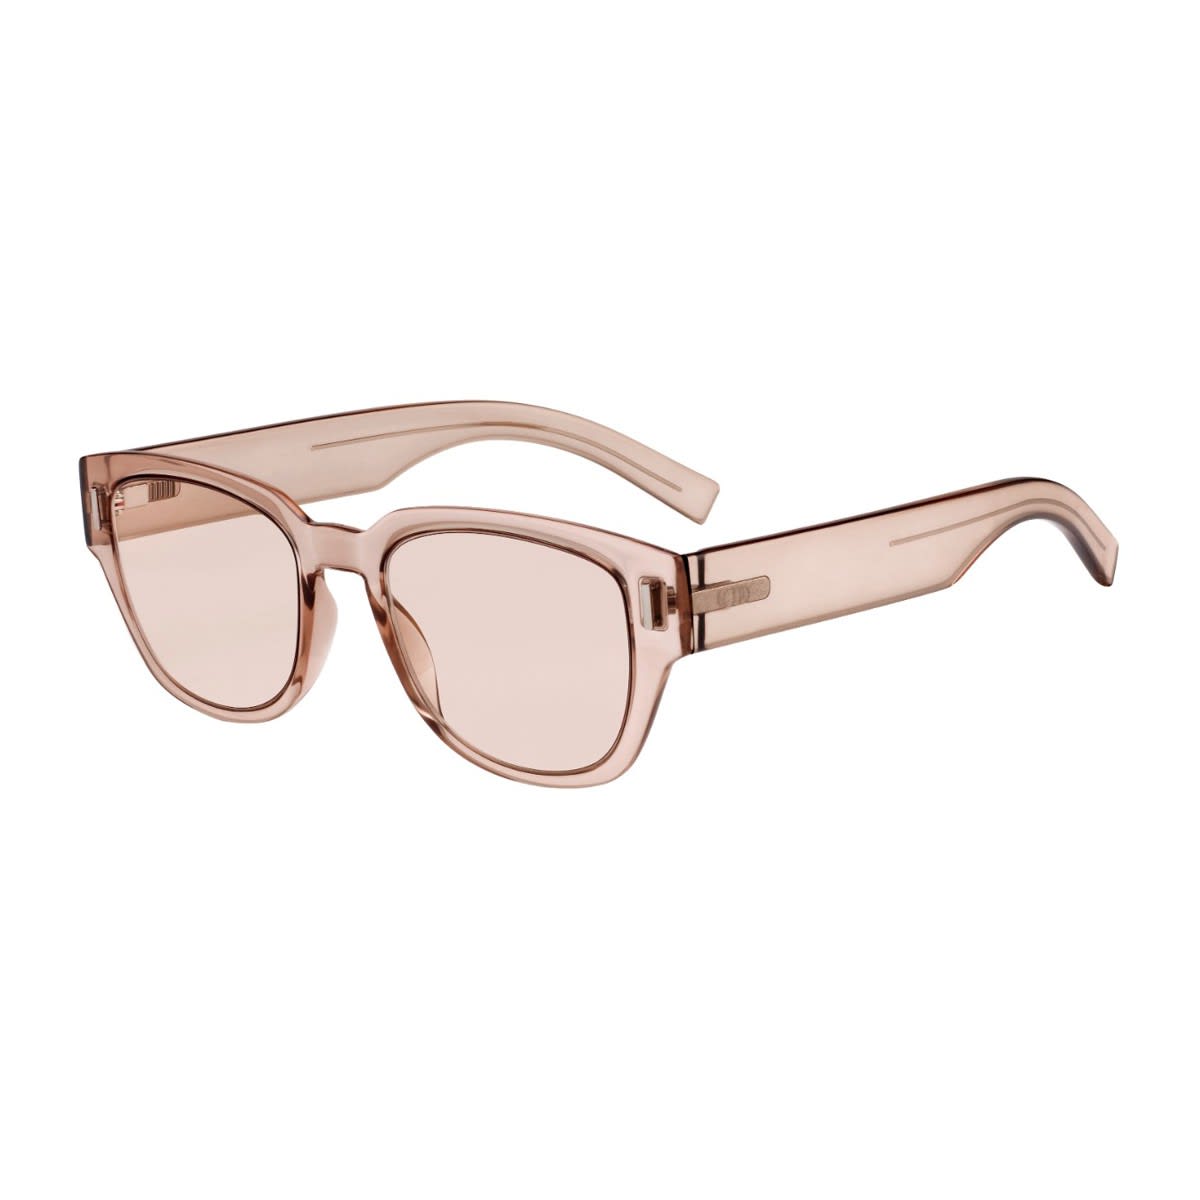 Dior Fraction 3 Sunglasses In Rosa